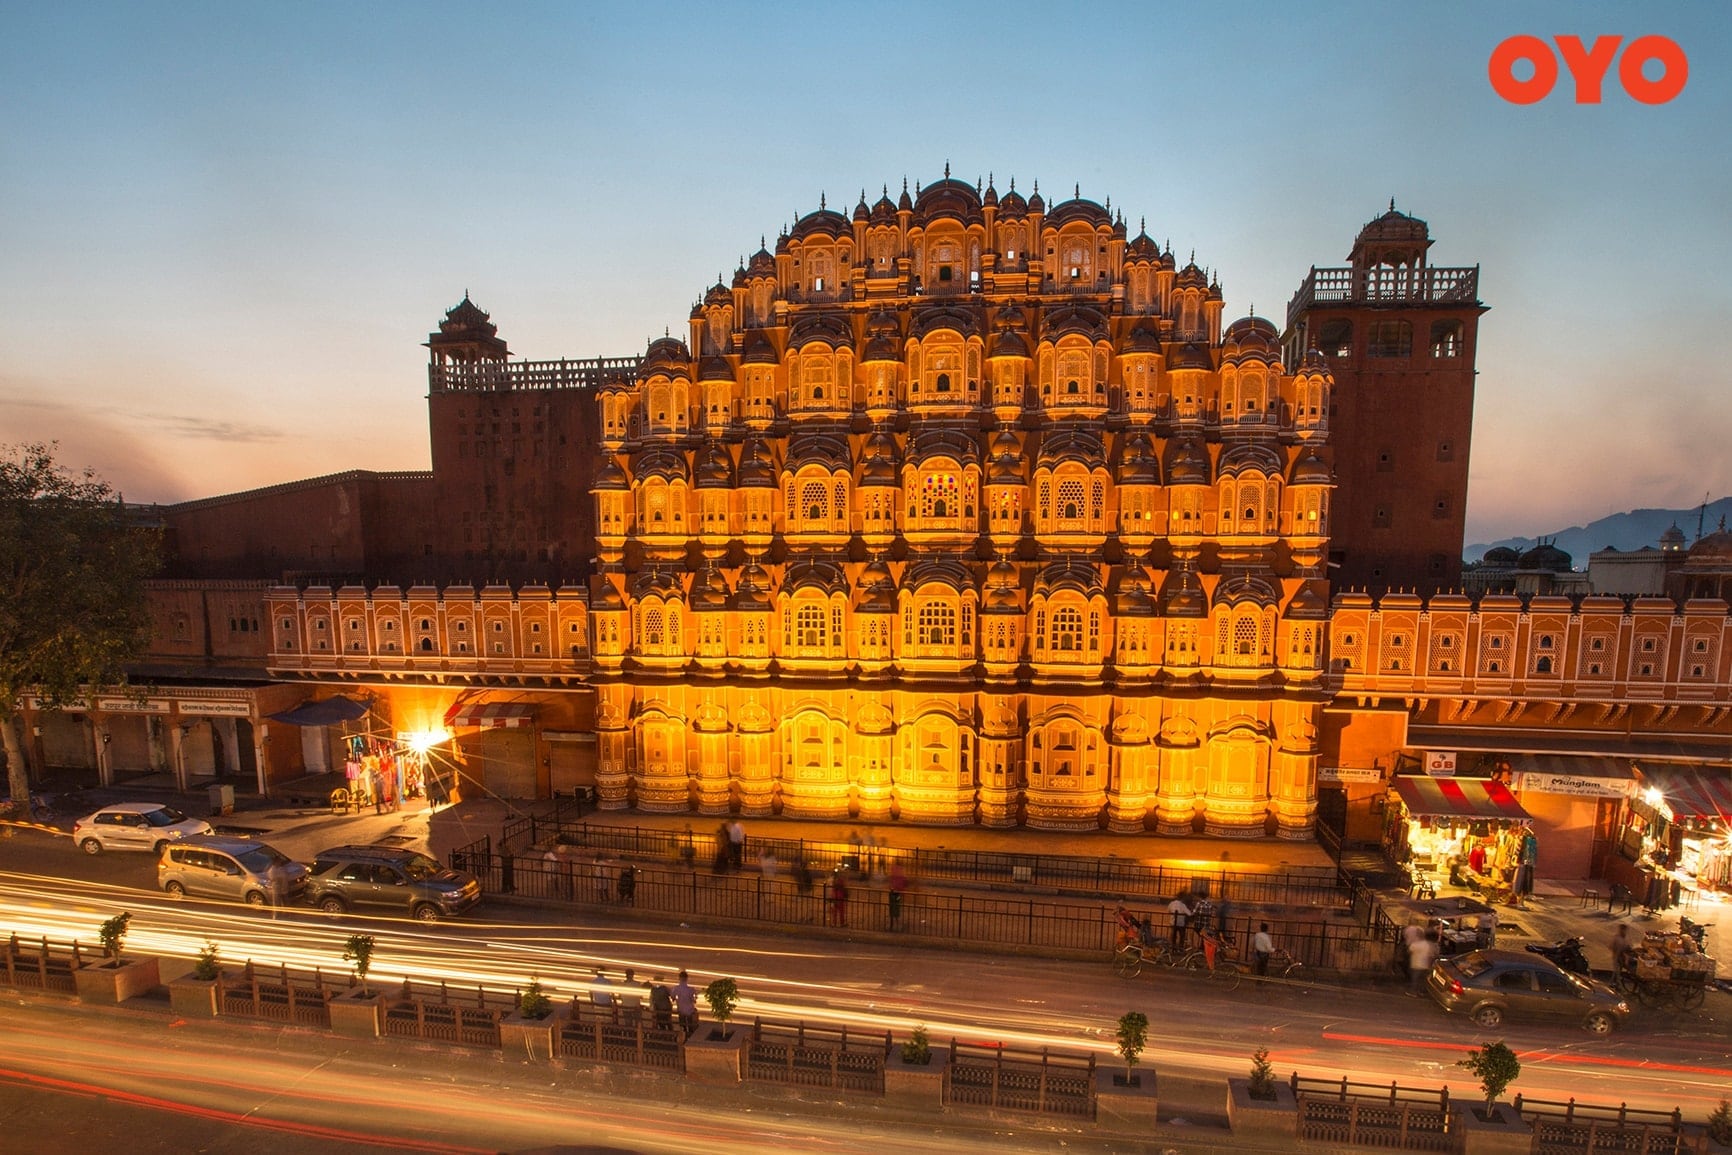 Hawa Mahal, Jaipur - One of the most famous palaces in India